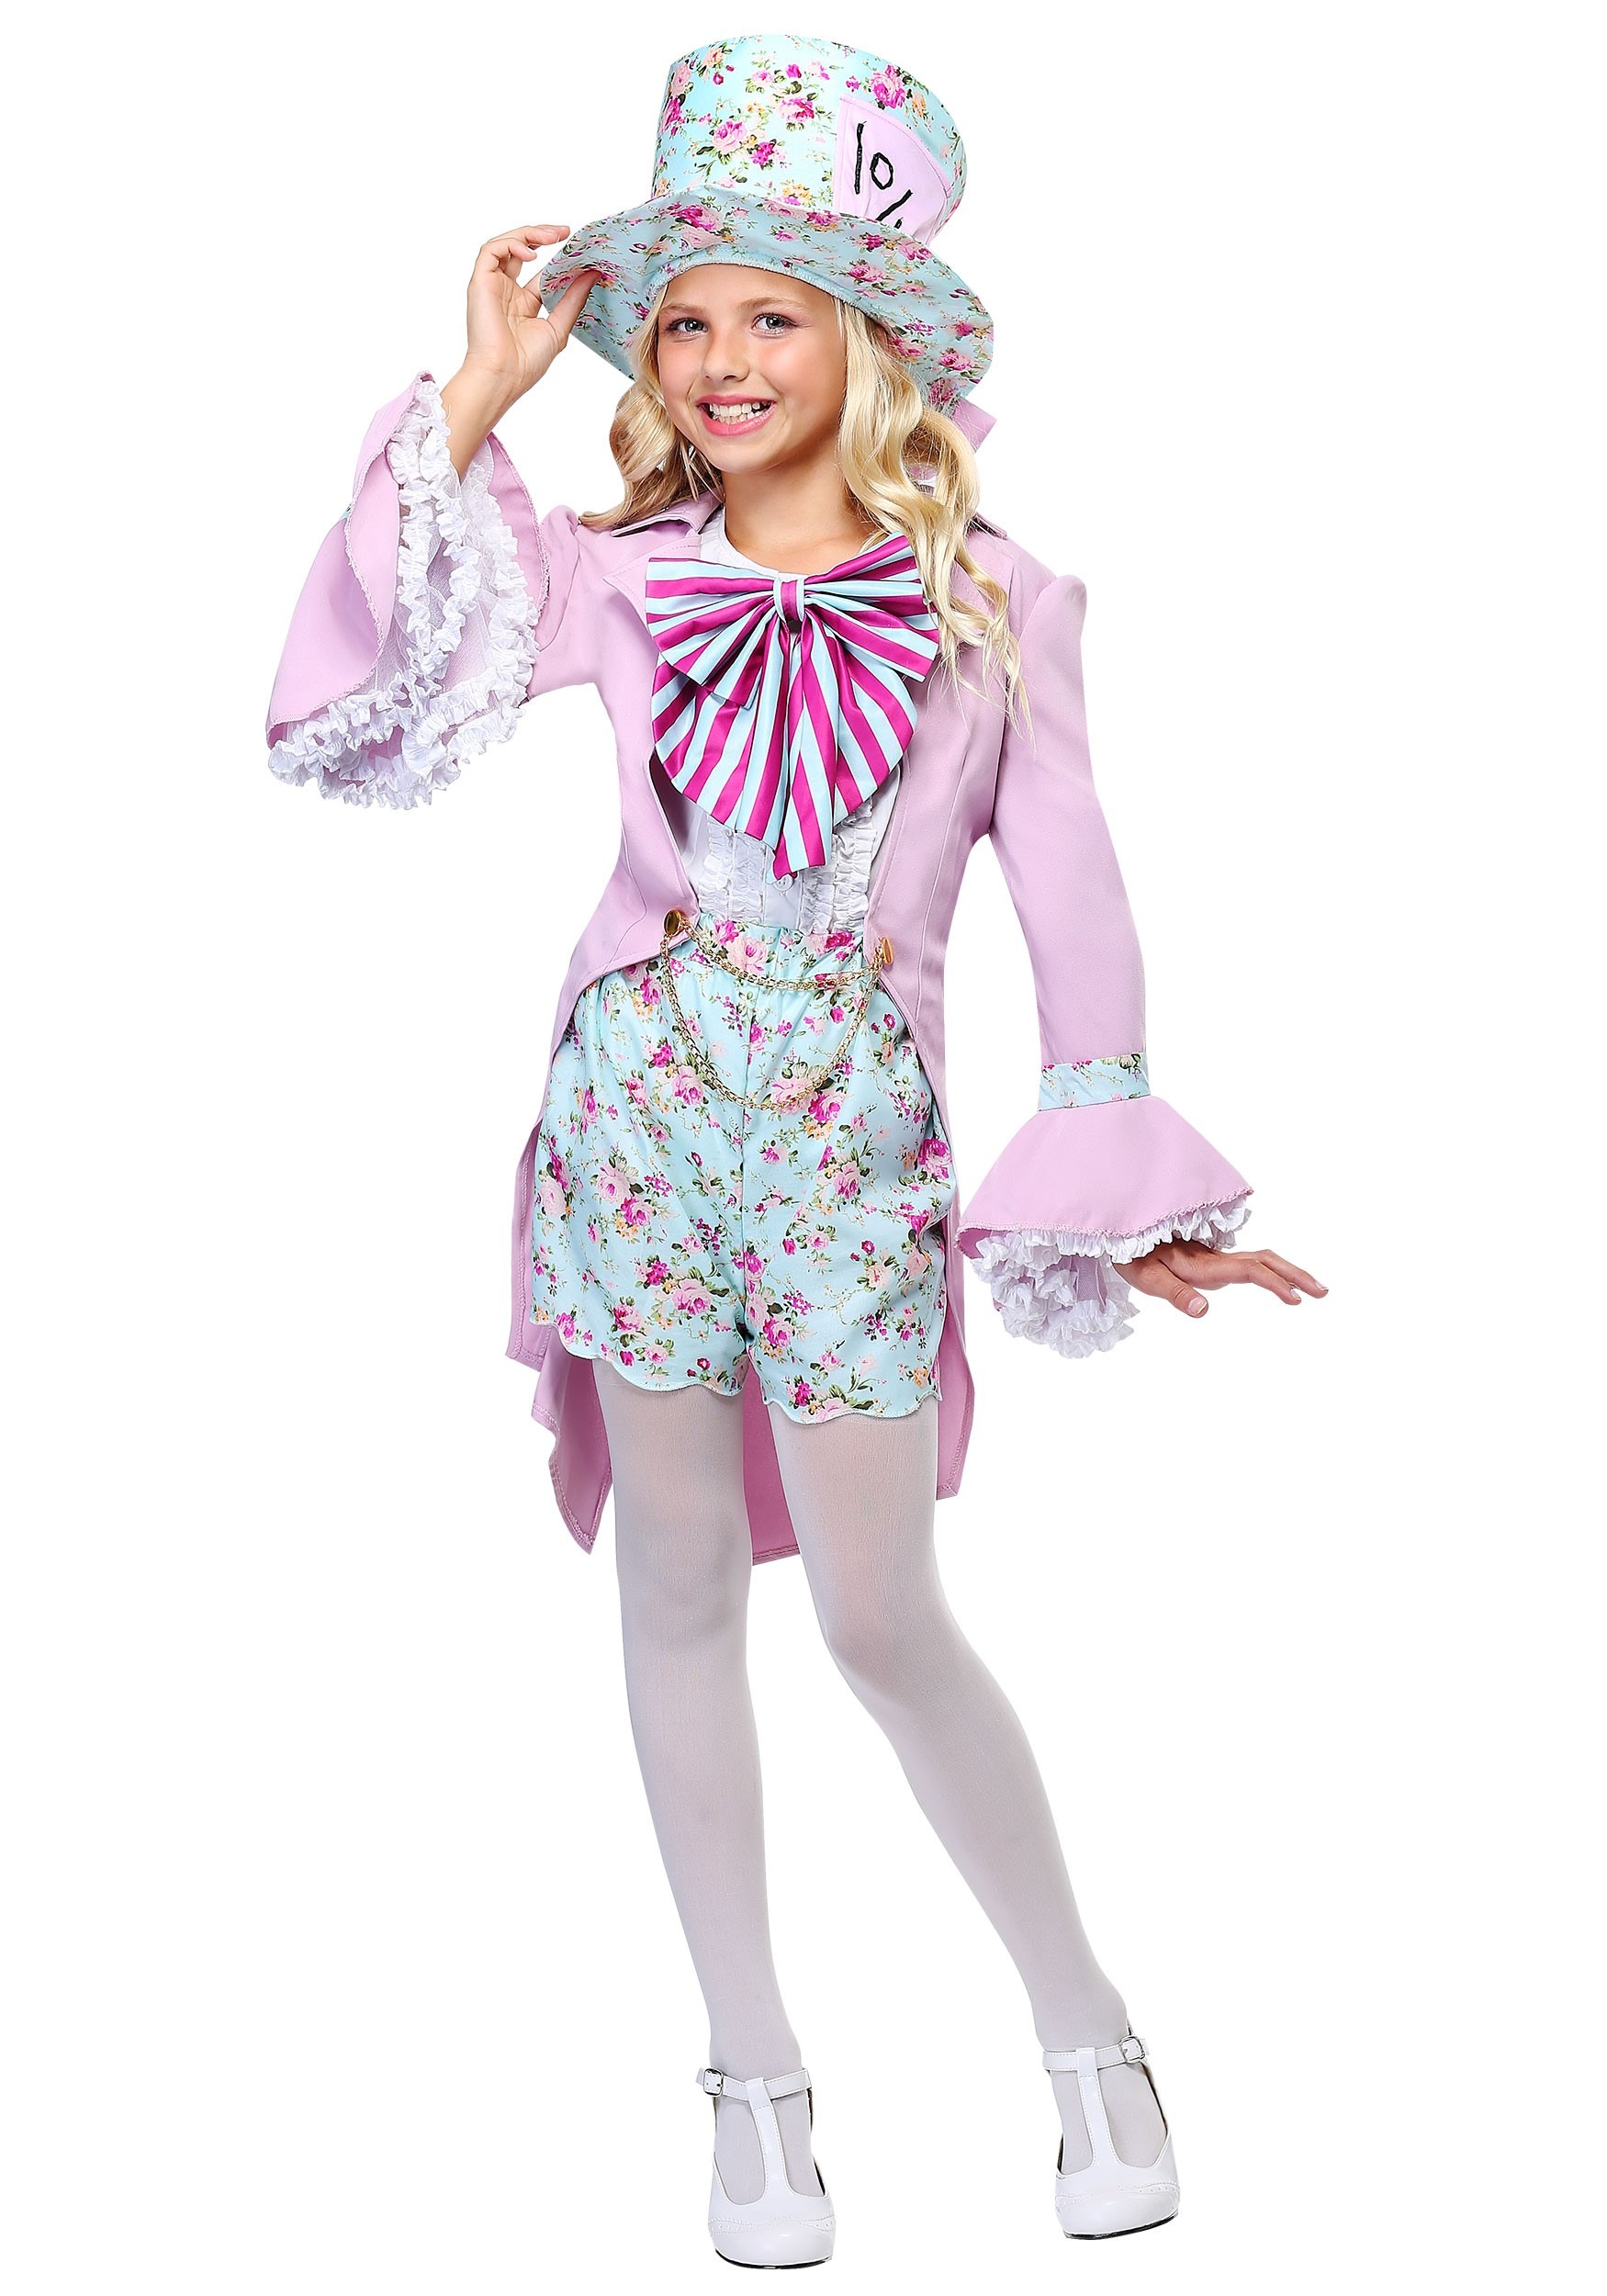 Photos - Fancy Dress Mad Hatter FUN Costumes Pretty  Girls Costume Pink/Blue 